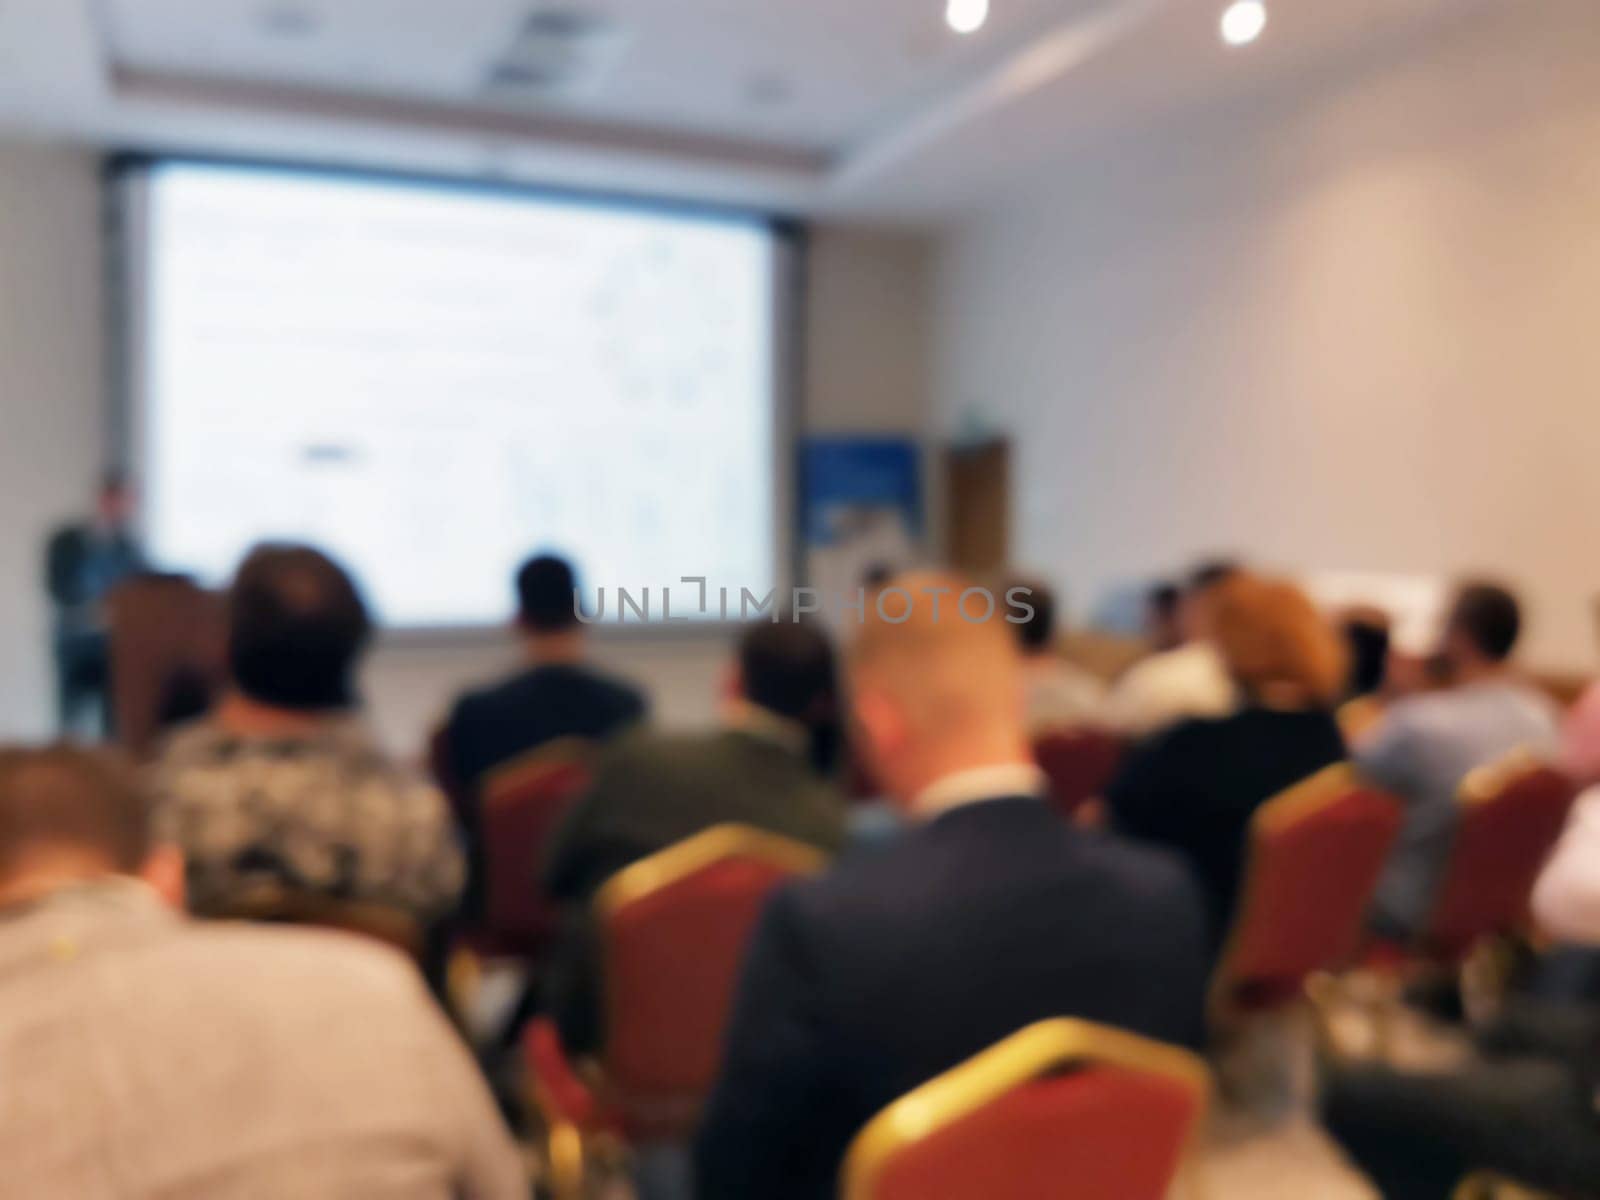 Blurred background image of audience in a business conference or seminar. by BY-_-BY